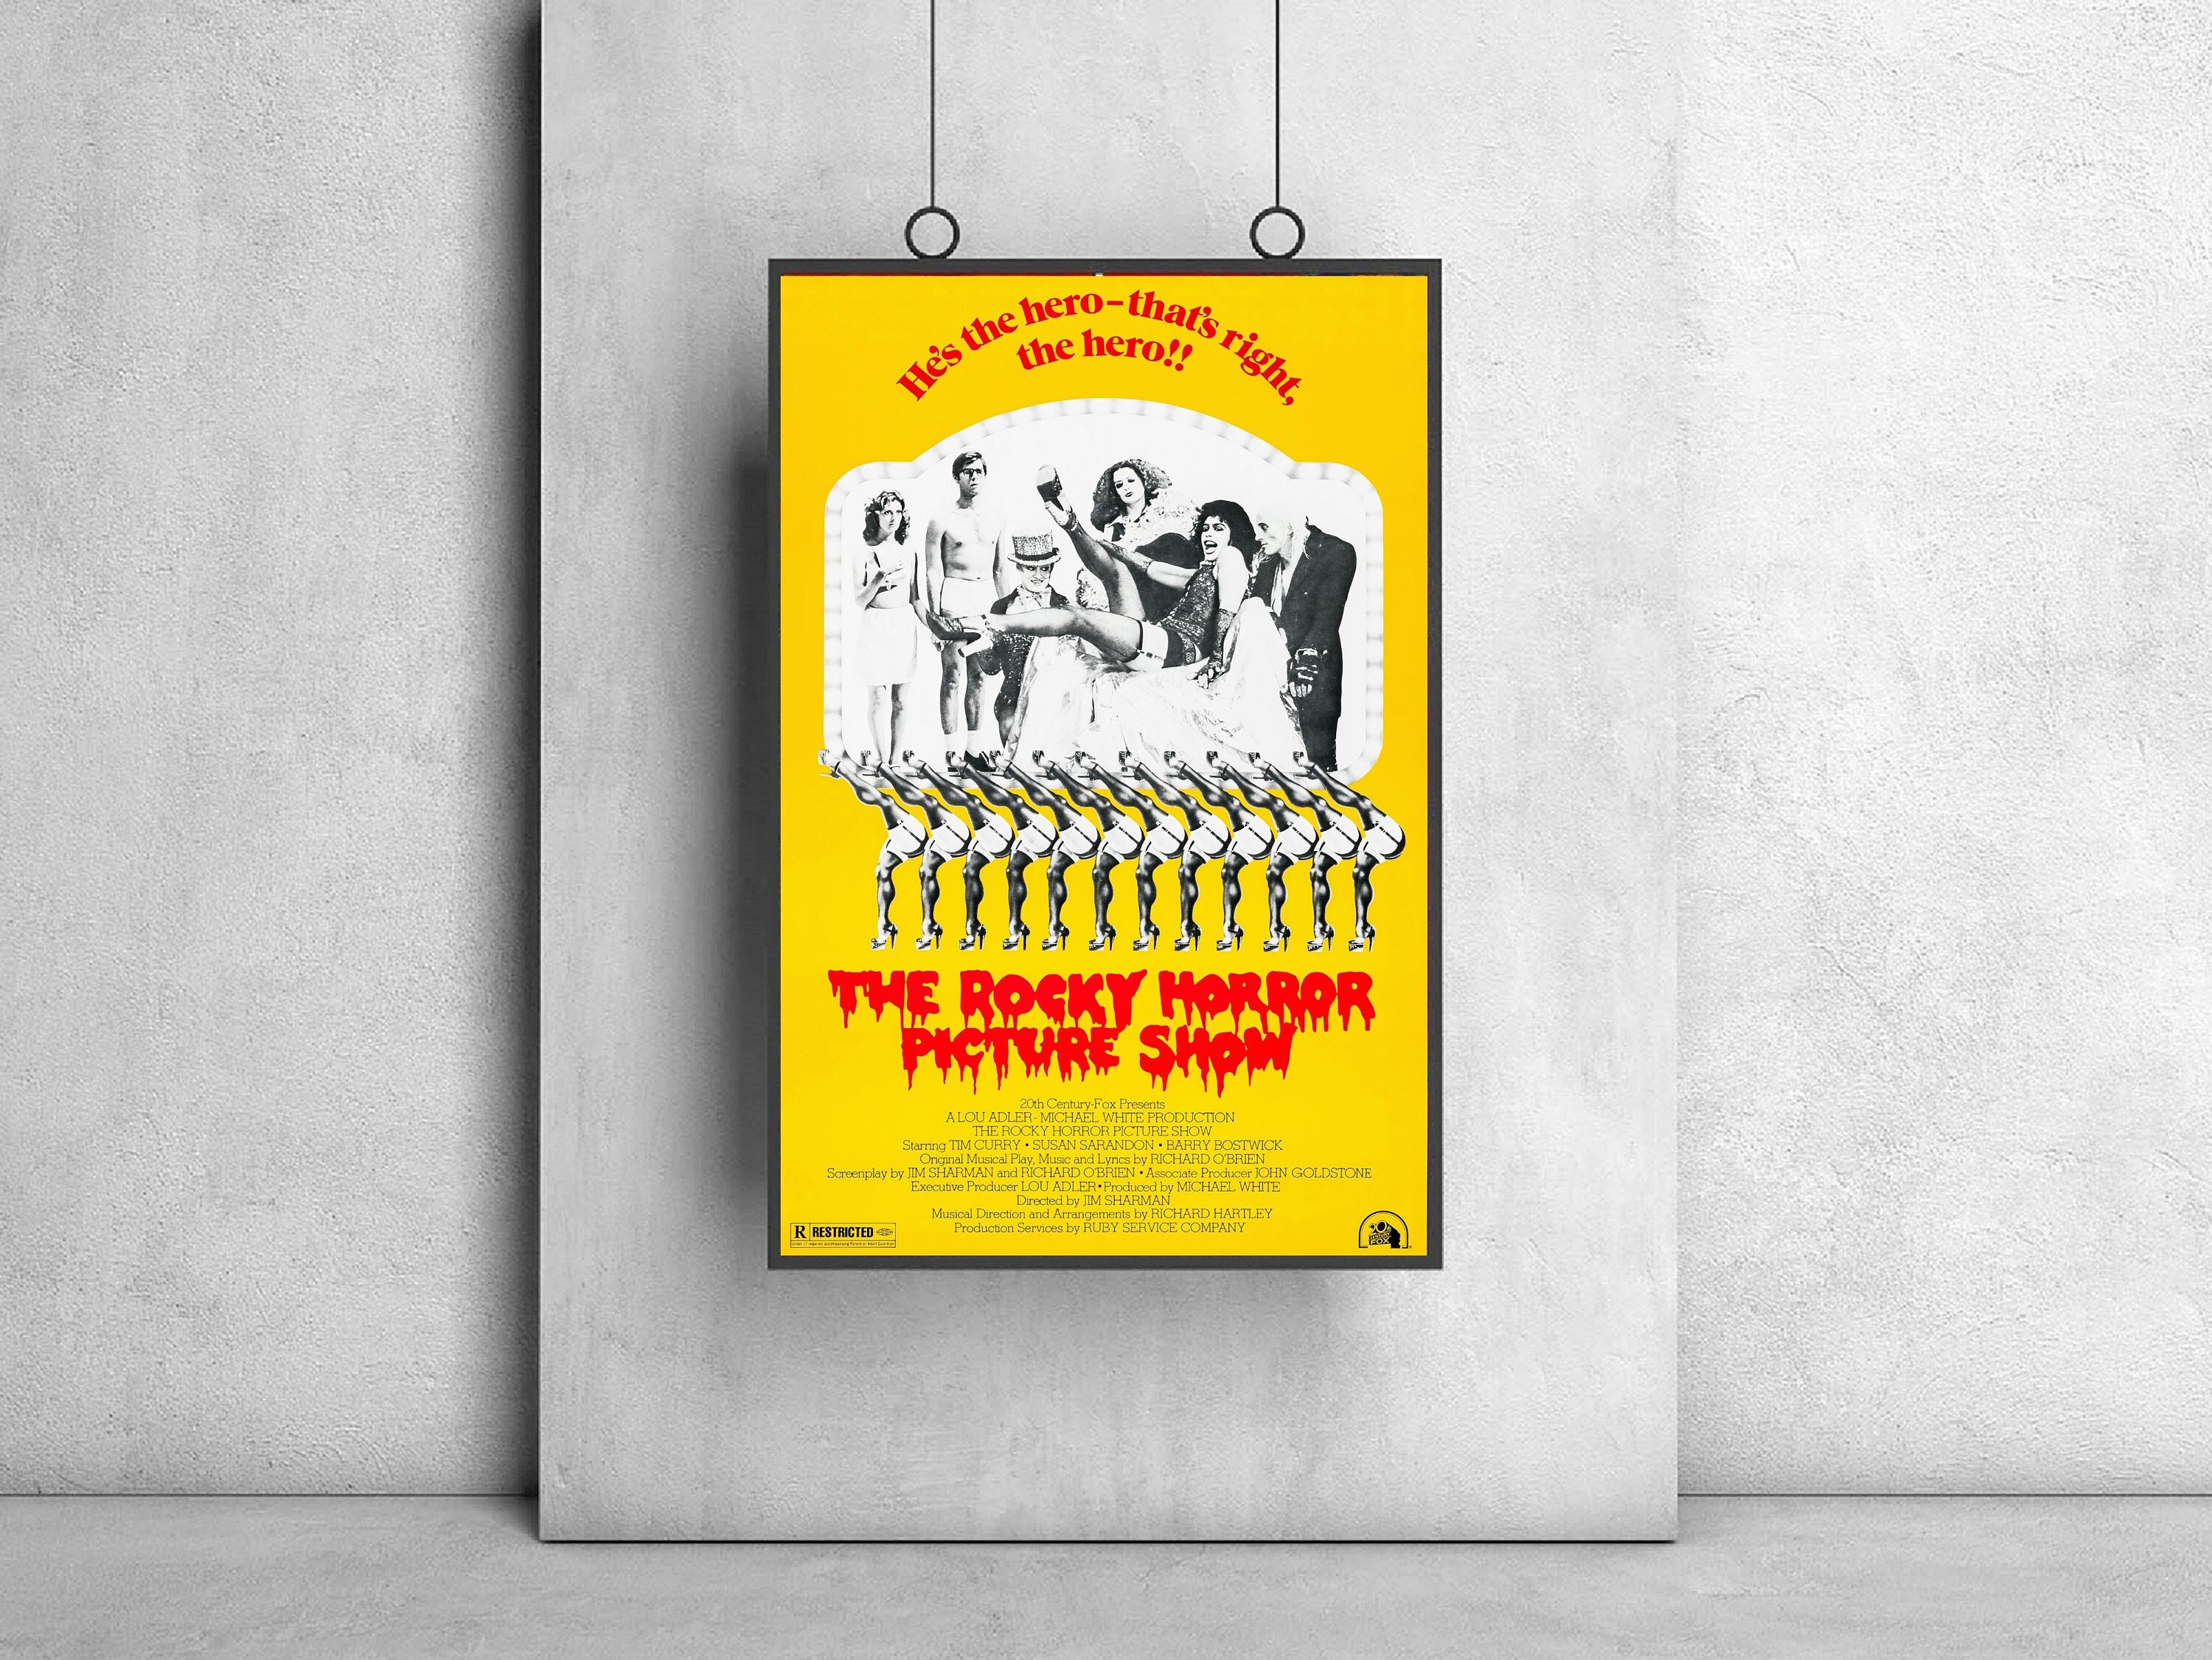 The Rocky Horror Picture Show Movie Poster, Vintage Movie Poster, Vintage Film Art, Classic Film Poster, Retro Movie Poster, Poster Wall Art